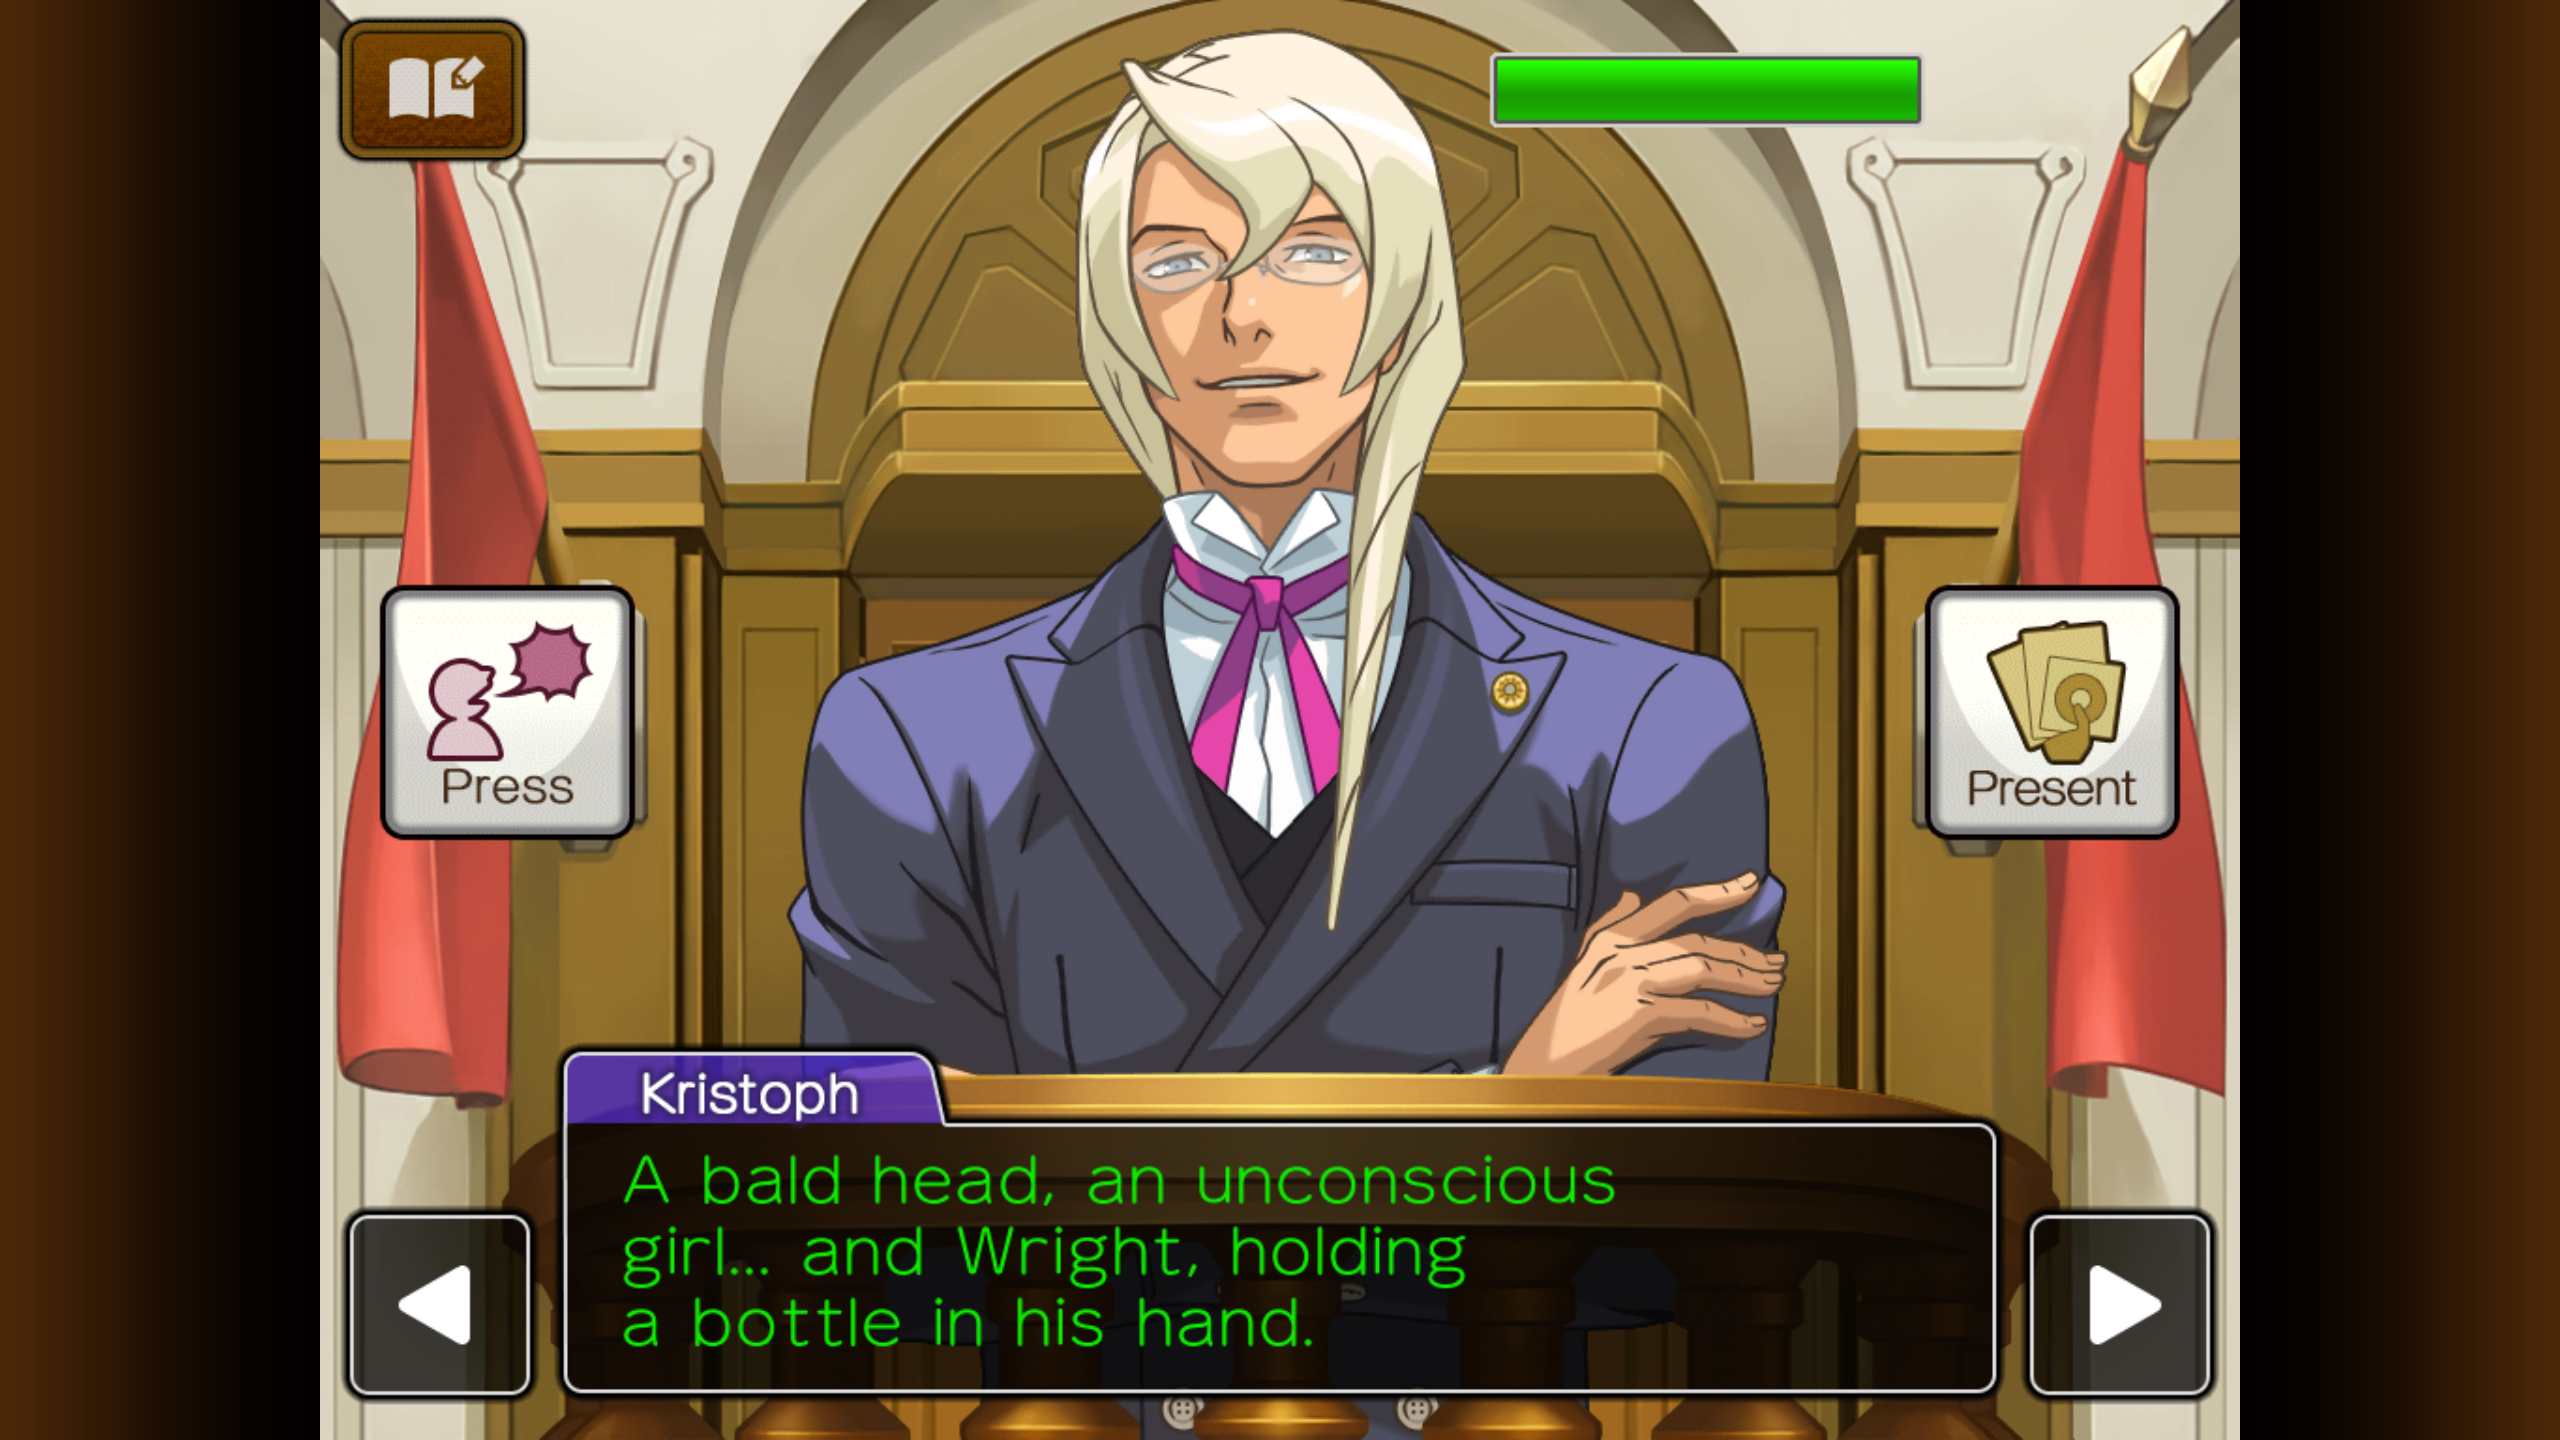 Apollo Justice: Ace Attorney Episode 1 Turnabout Trump Part 2 Case Guide Cross-Examination That Fateful Night